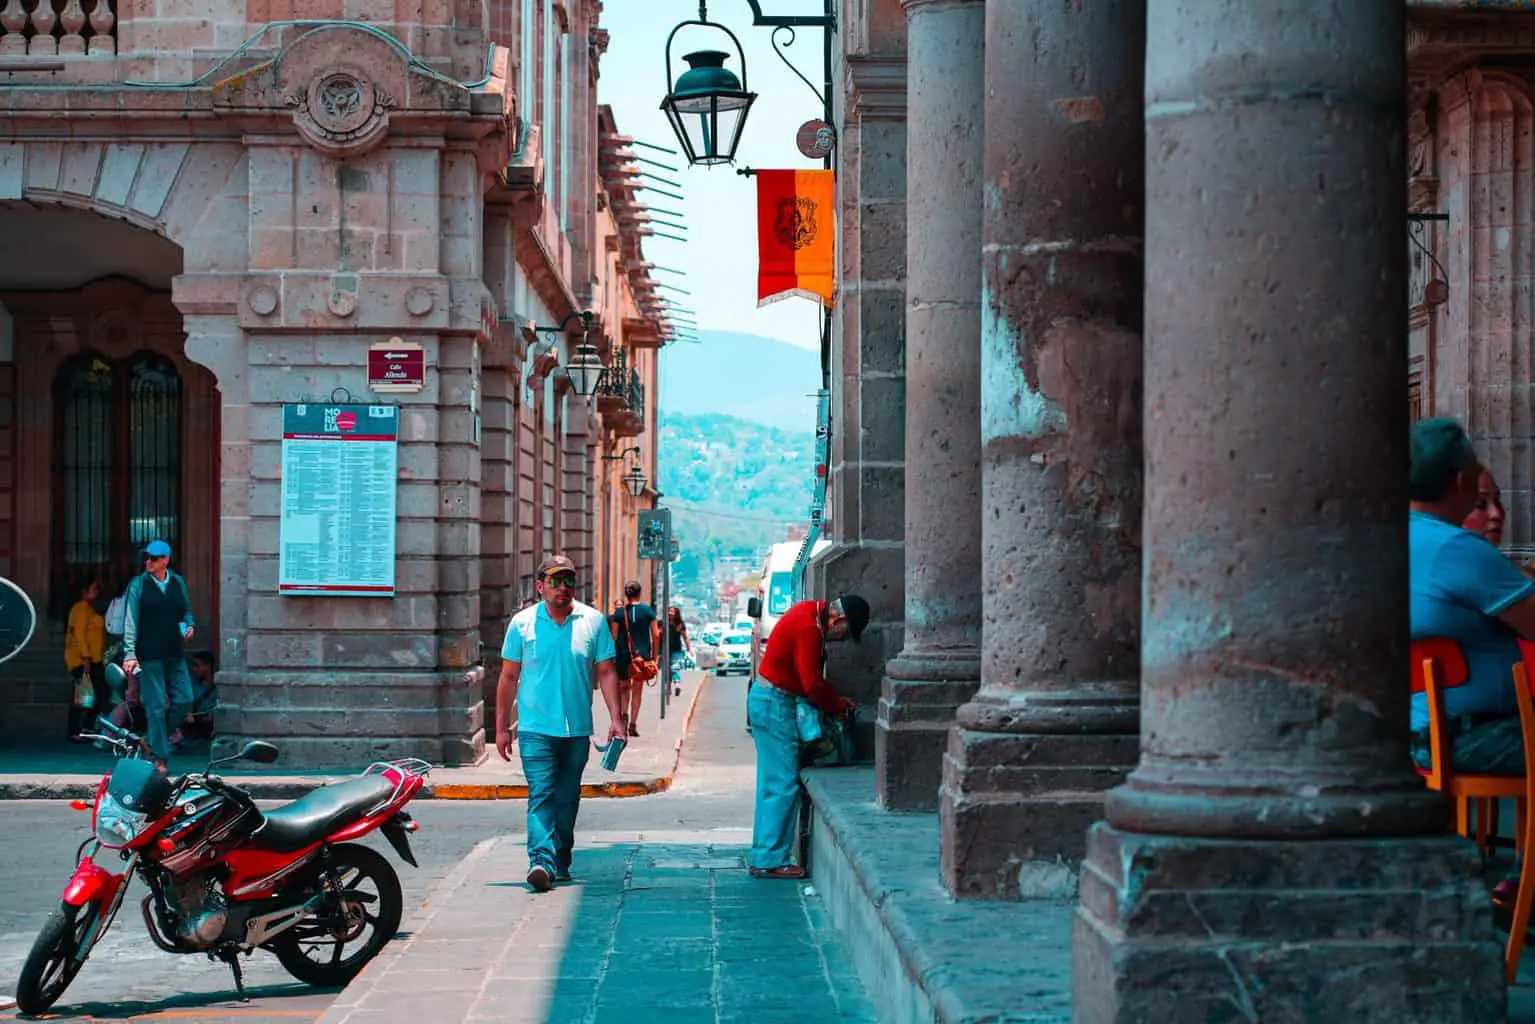 Things to do in Morelia